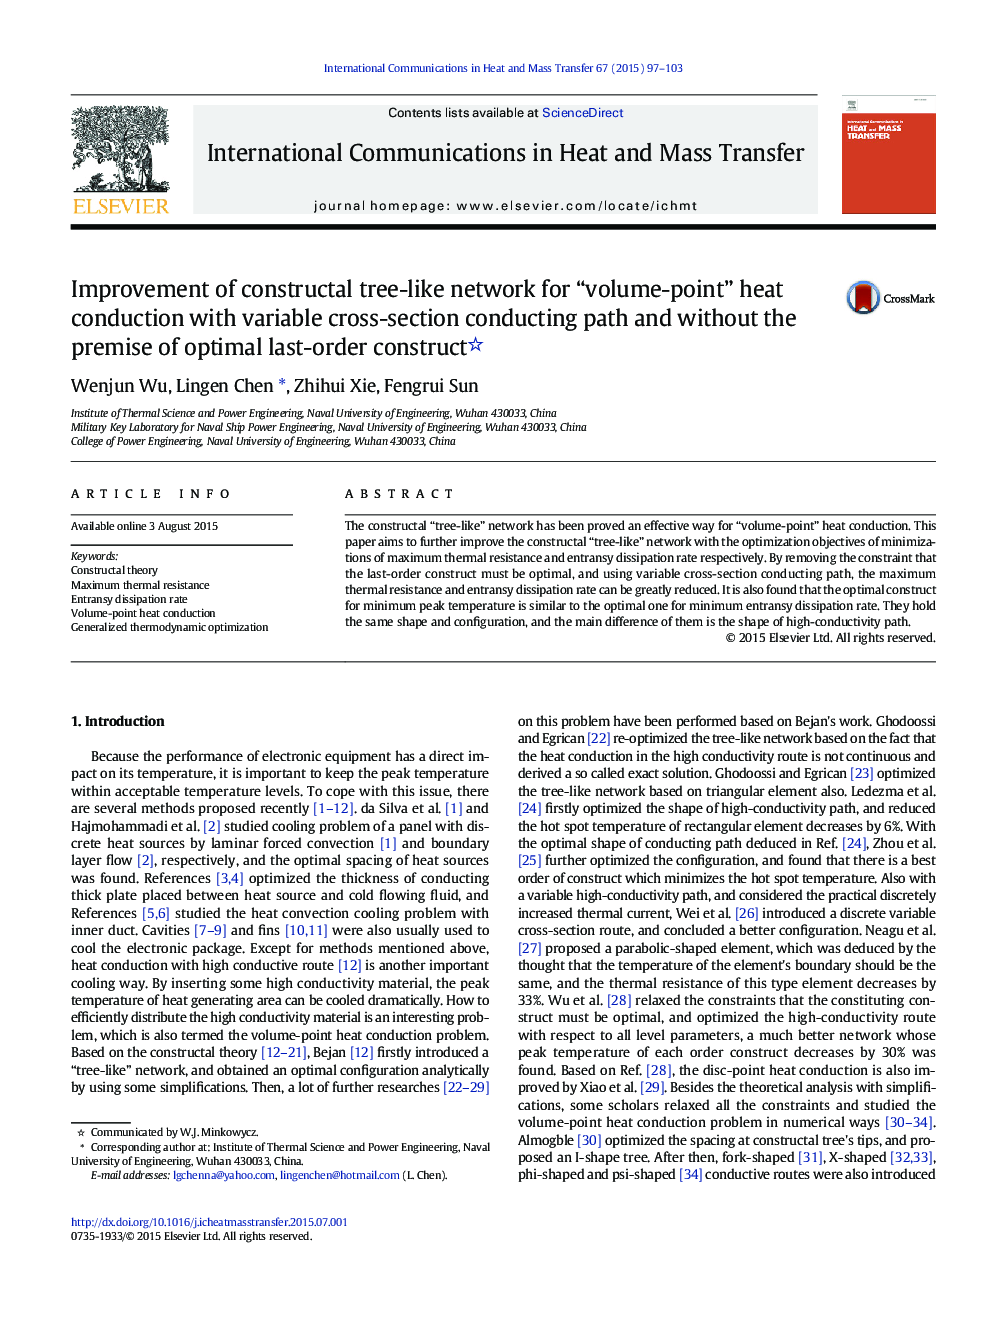 Improvement of constructal tree-like network for “volume-point” heat conduction with variable cross-section conducting path and without the premise of optimal last-order construct 